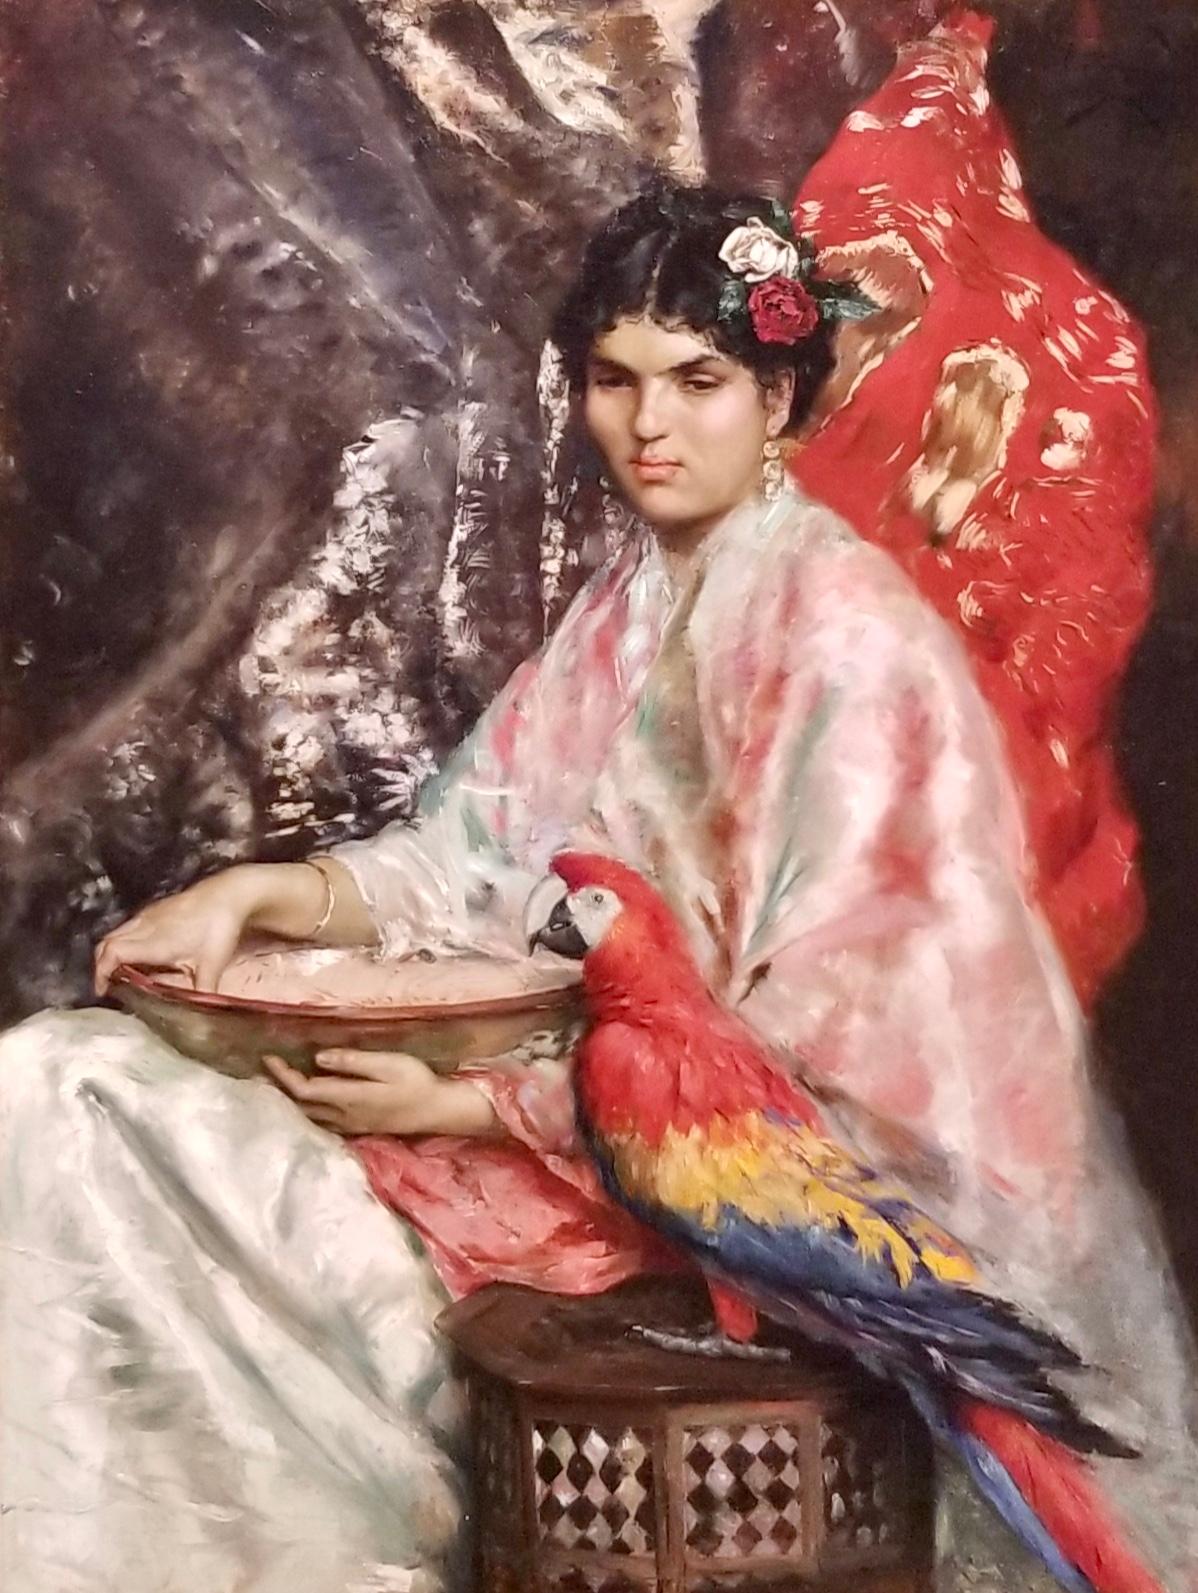 Julius LeBlanc Stewart, 1855-1919
ex. Sothebys, Waterhouse and Dodd
signed J.L. Stewart and dated Paris, 1875, u.r.; also dedicated in the artist's hand 'à mon ami Fernande De L'Valle e Yznaga'
Oil on canvas measuring 46 1/2 by 35 3/4 in.